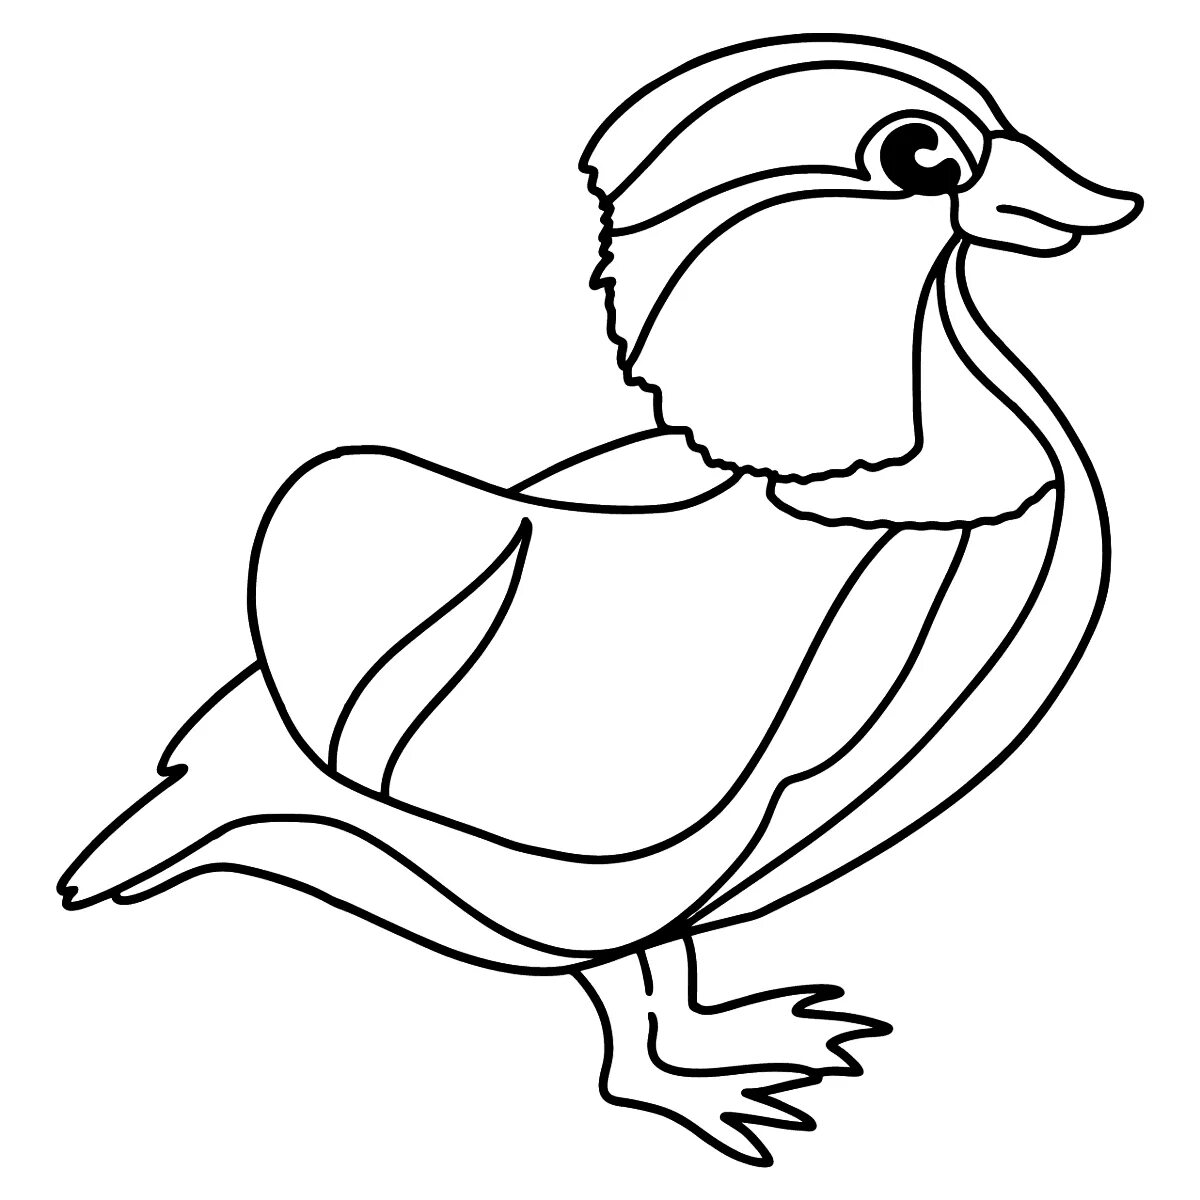 Stylish mandarin duck coloring pages for kids